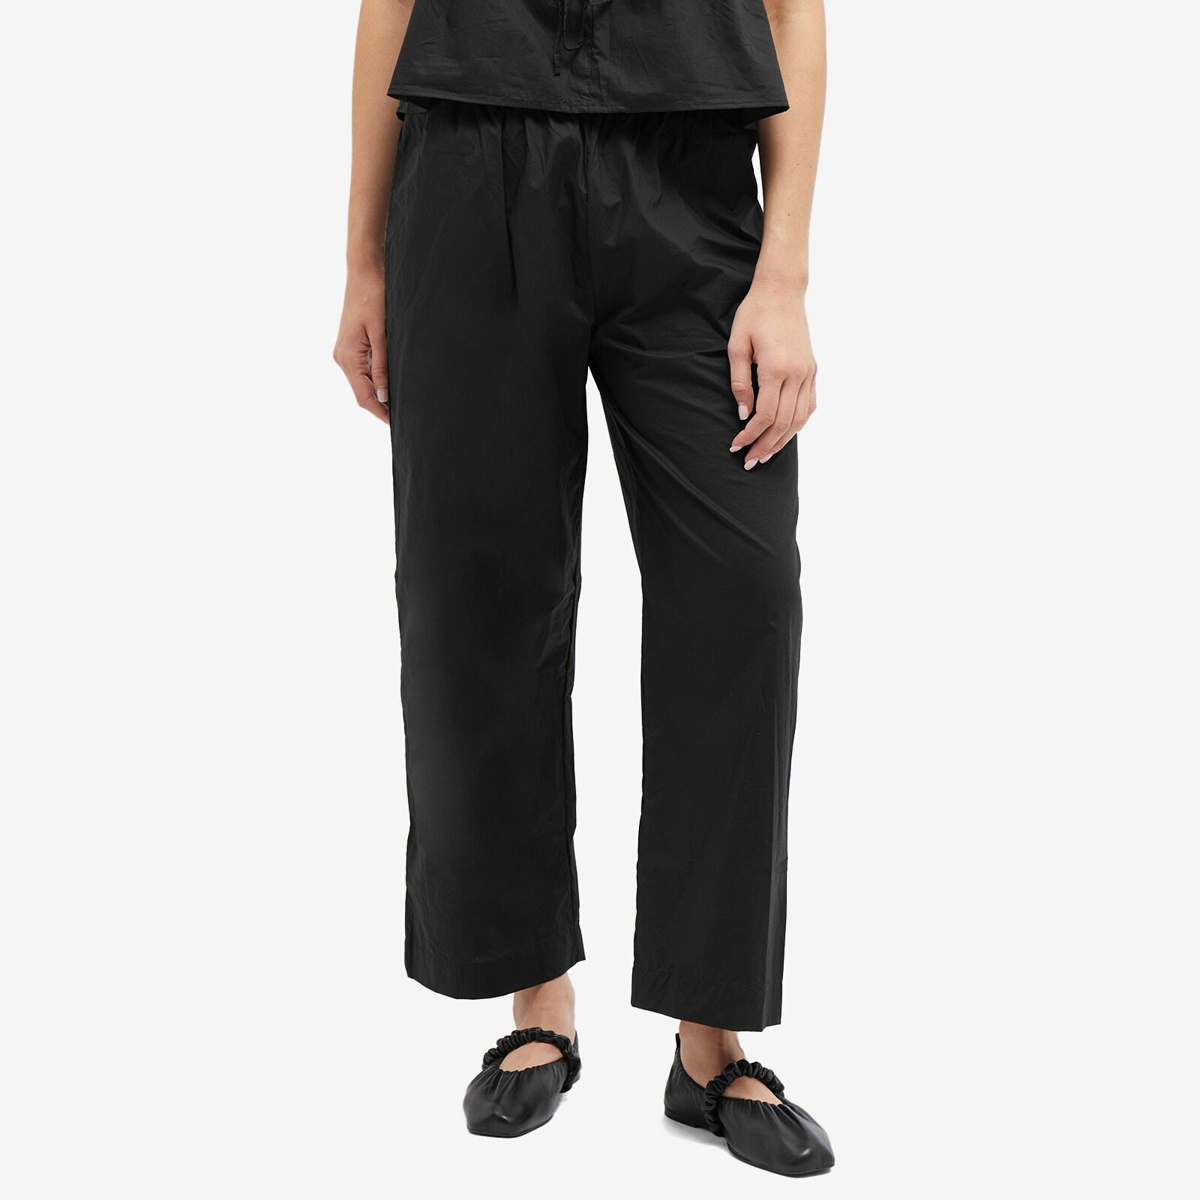 Black Cotton Trousers by System on Sale